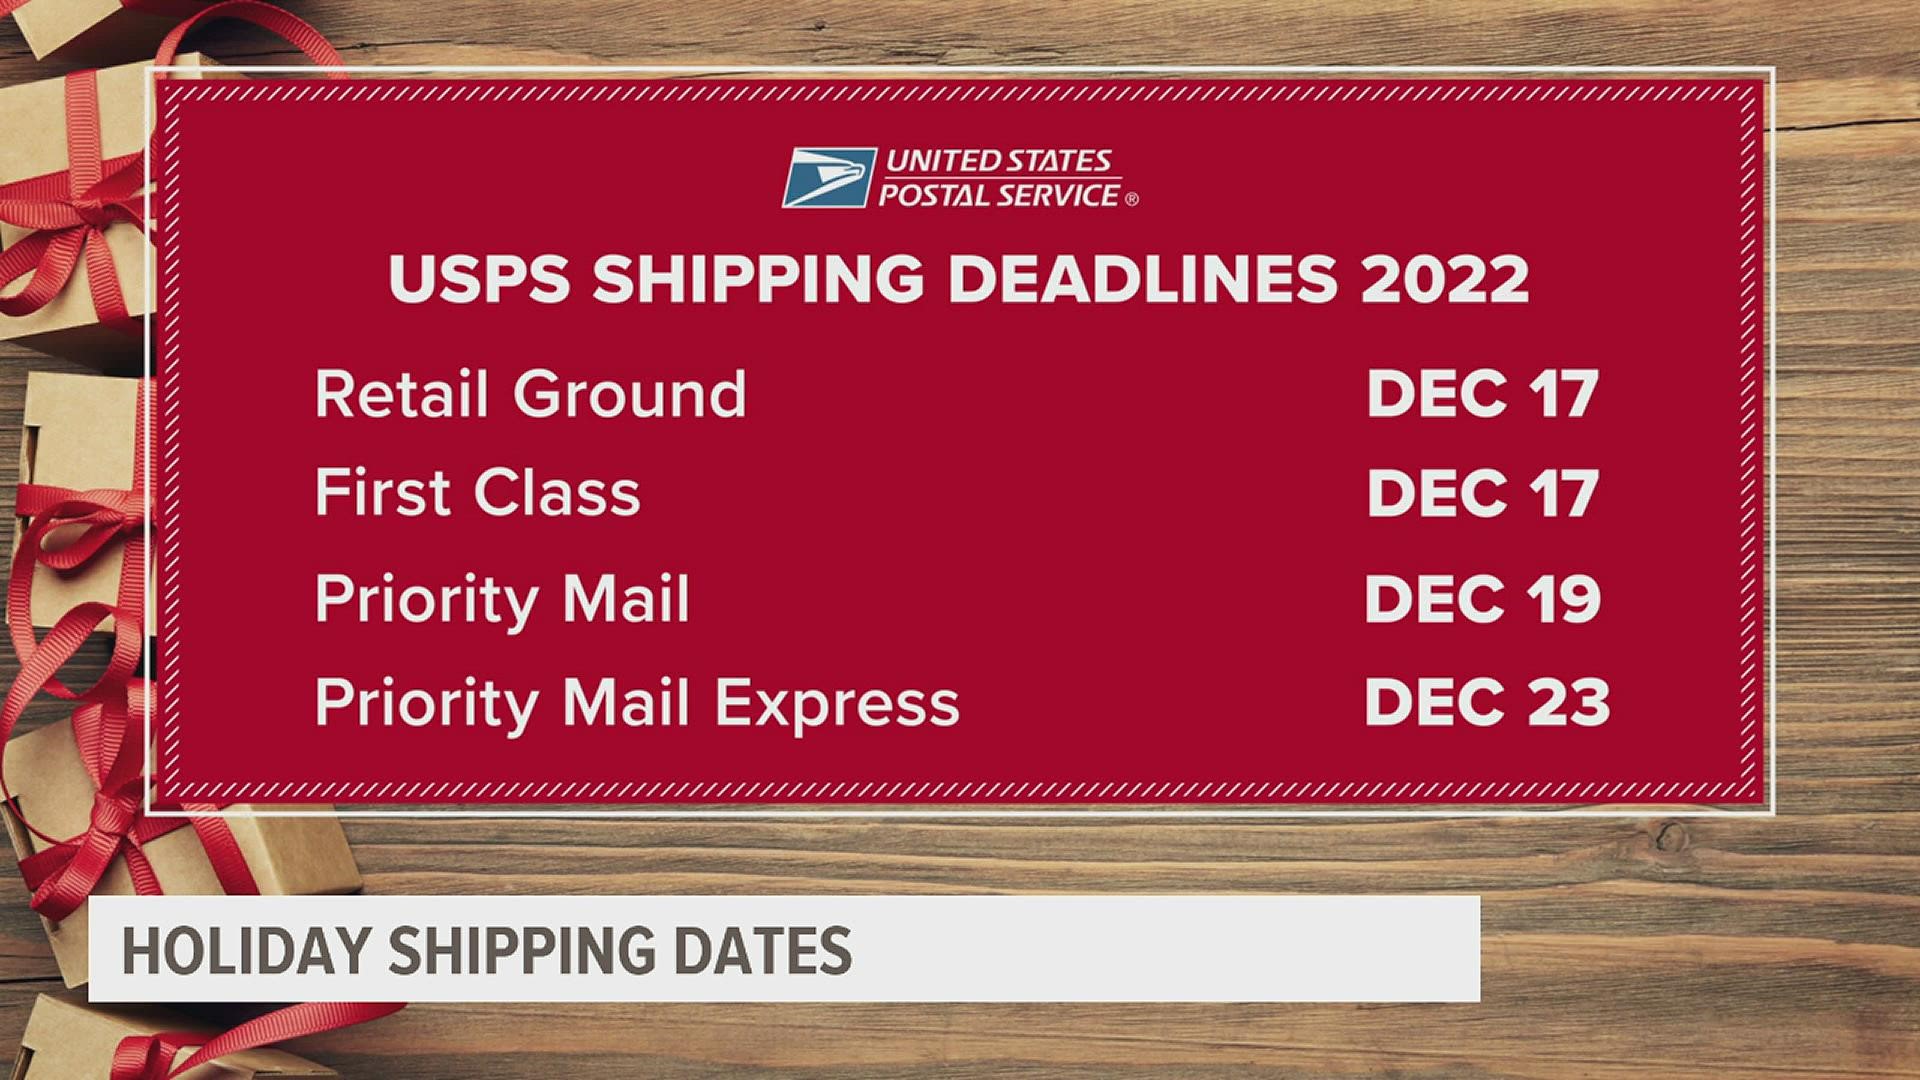 Sending a Christmas gift to friends or family a few states away? The first set of deadlines may be closer than you think.